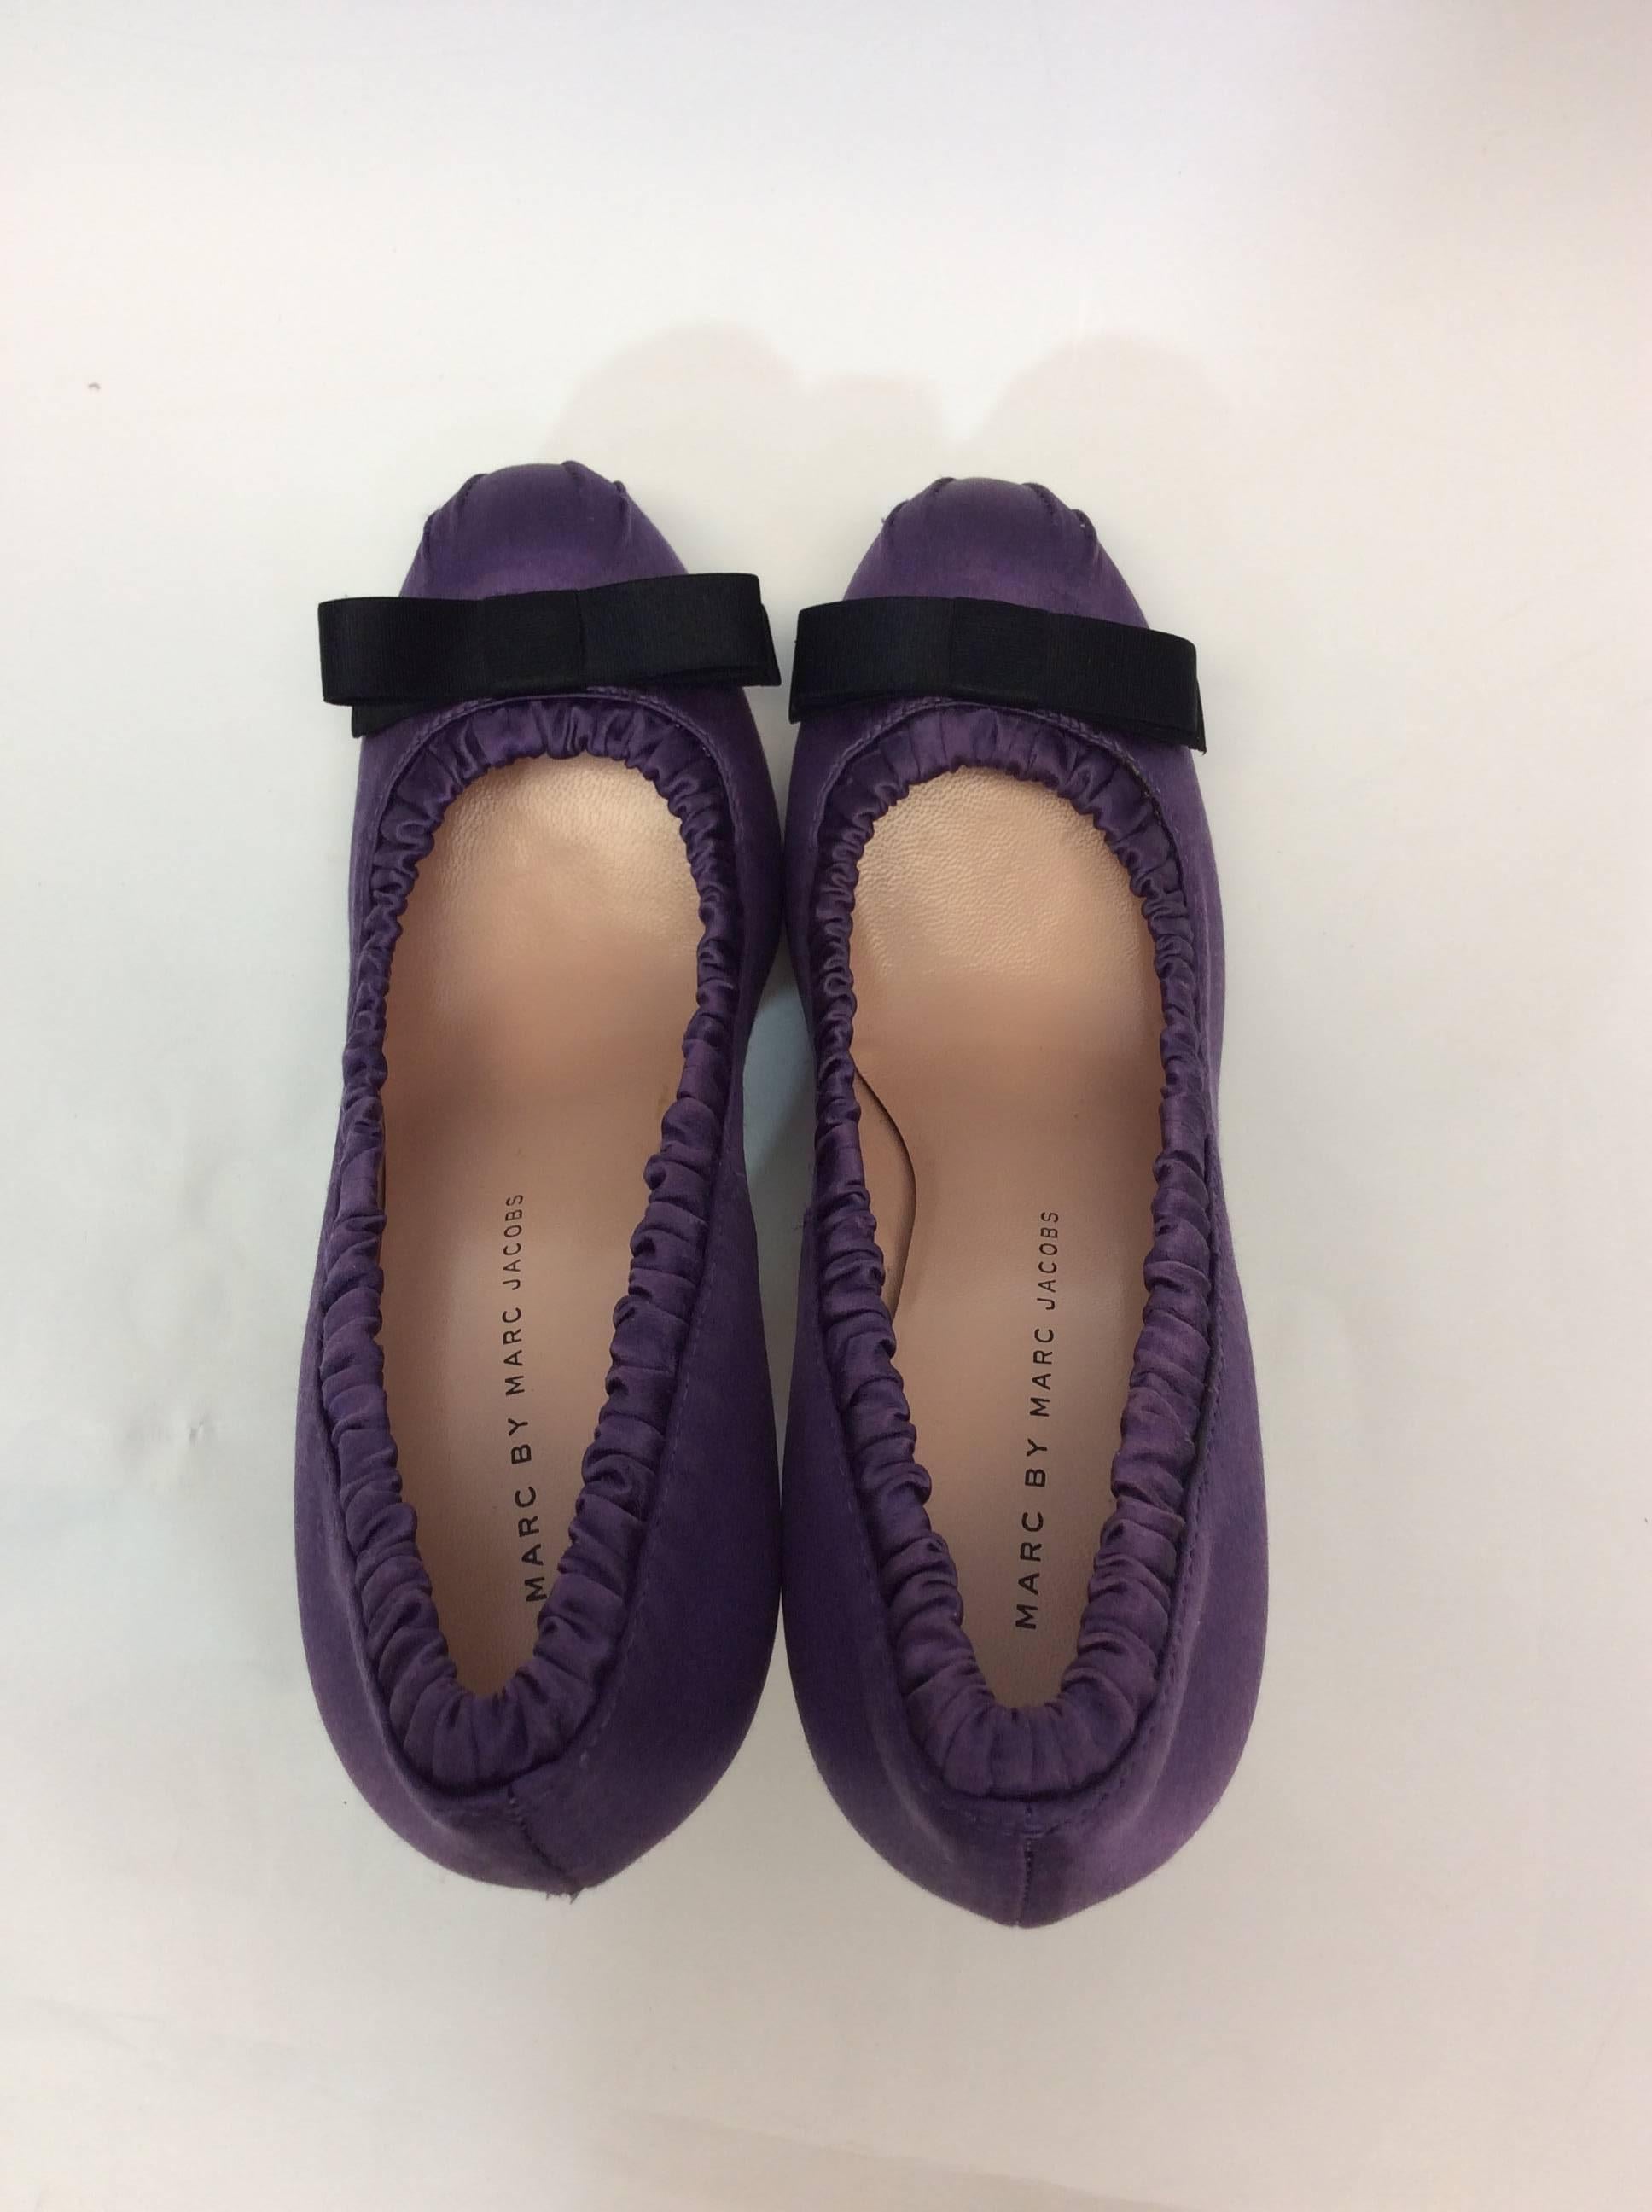 Marc by Marc Jacobs Purple Satin Pumps with Black Bow Detail For Sale 2